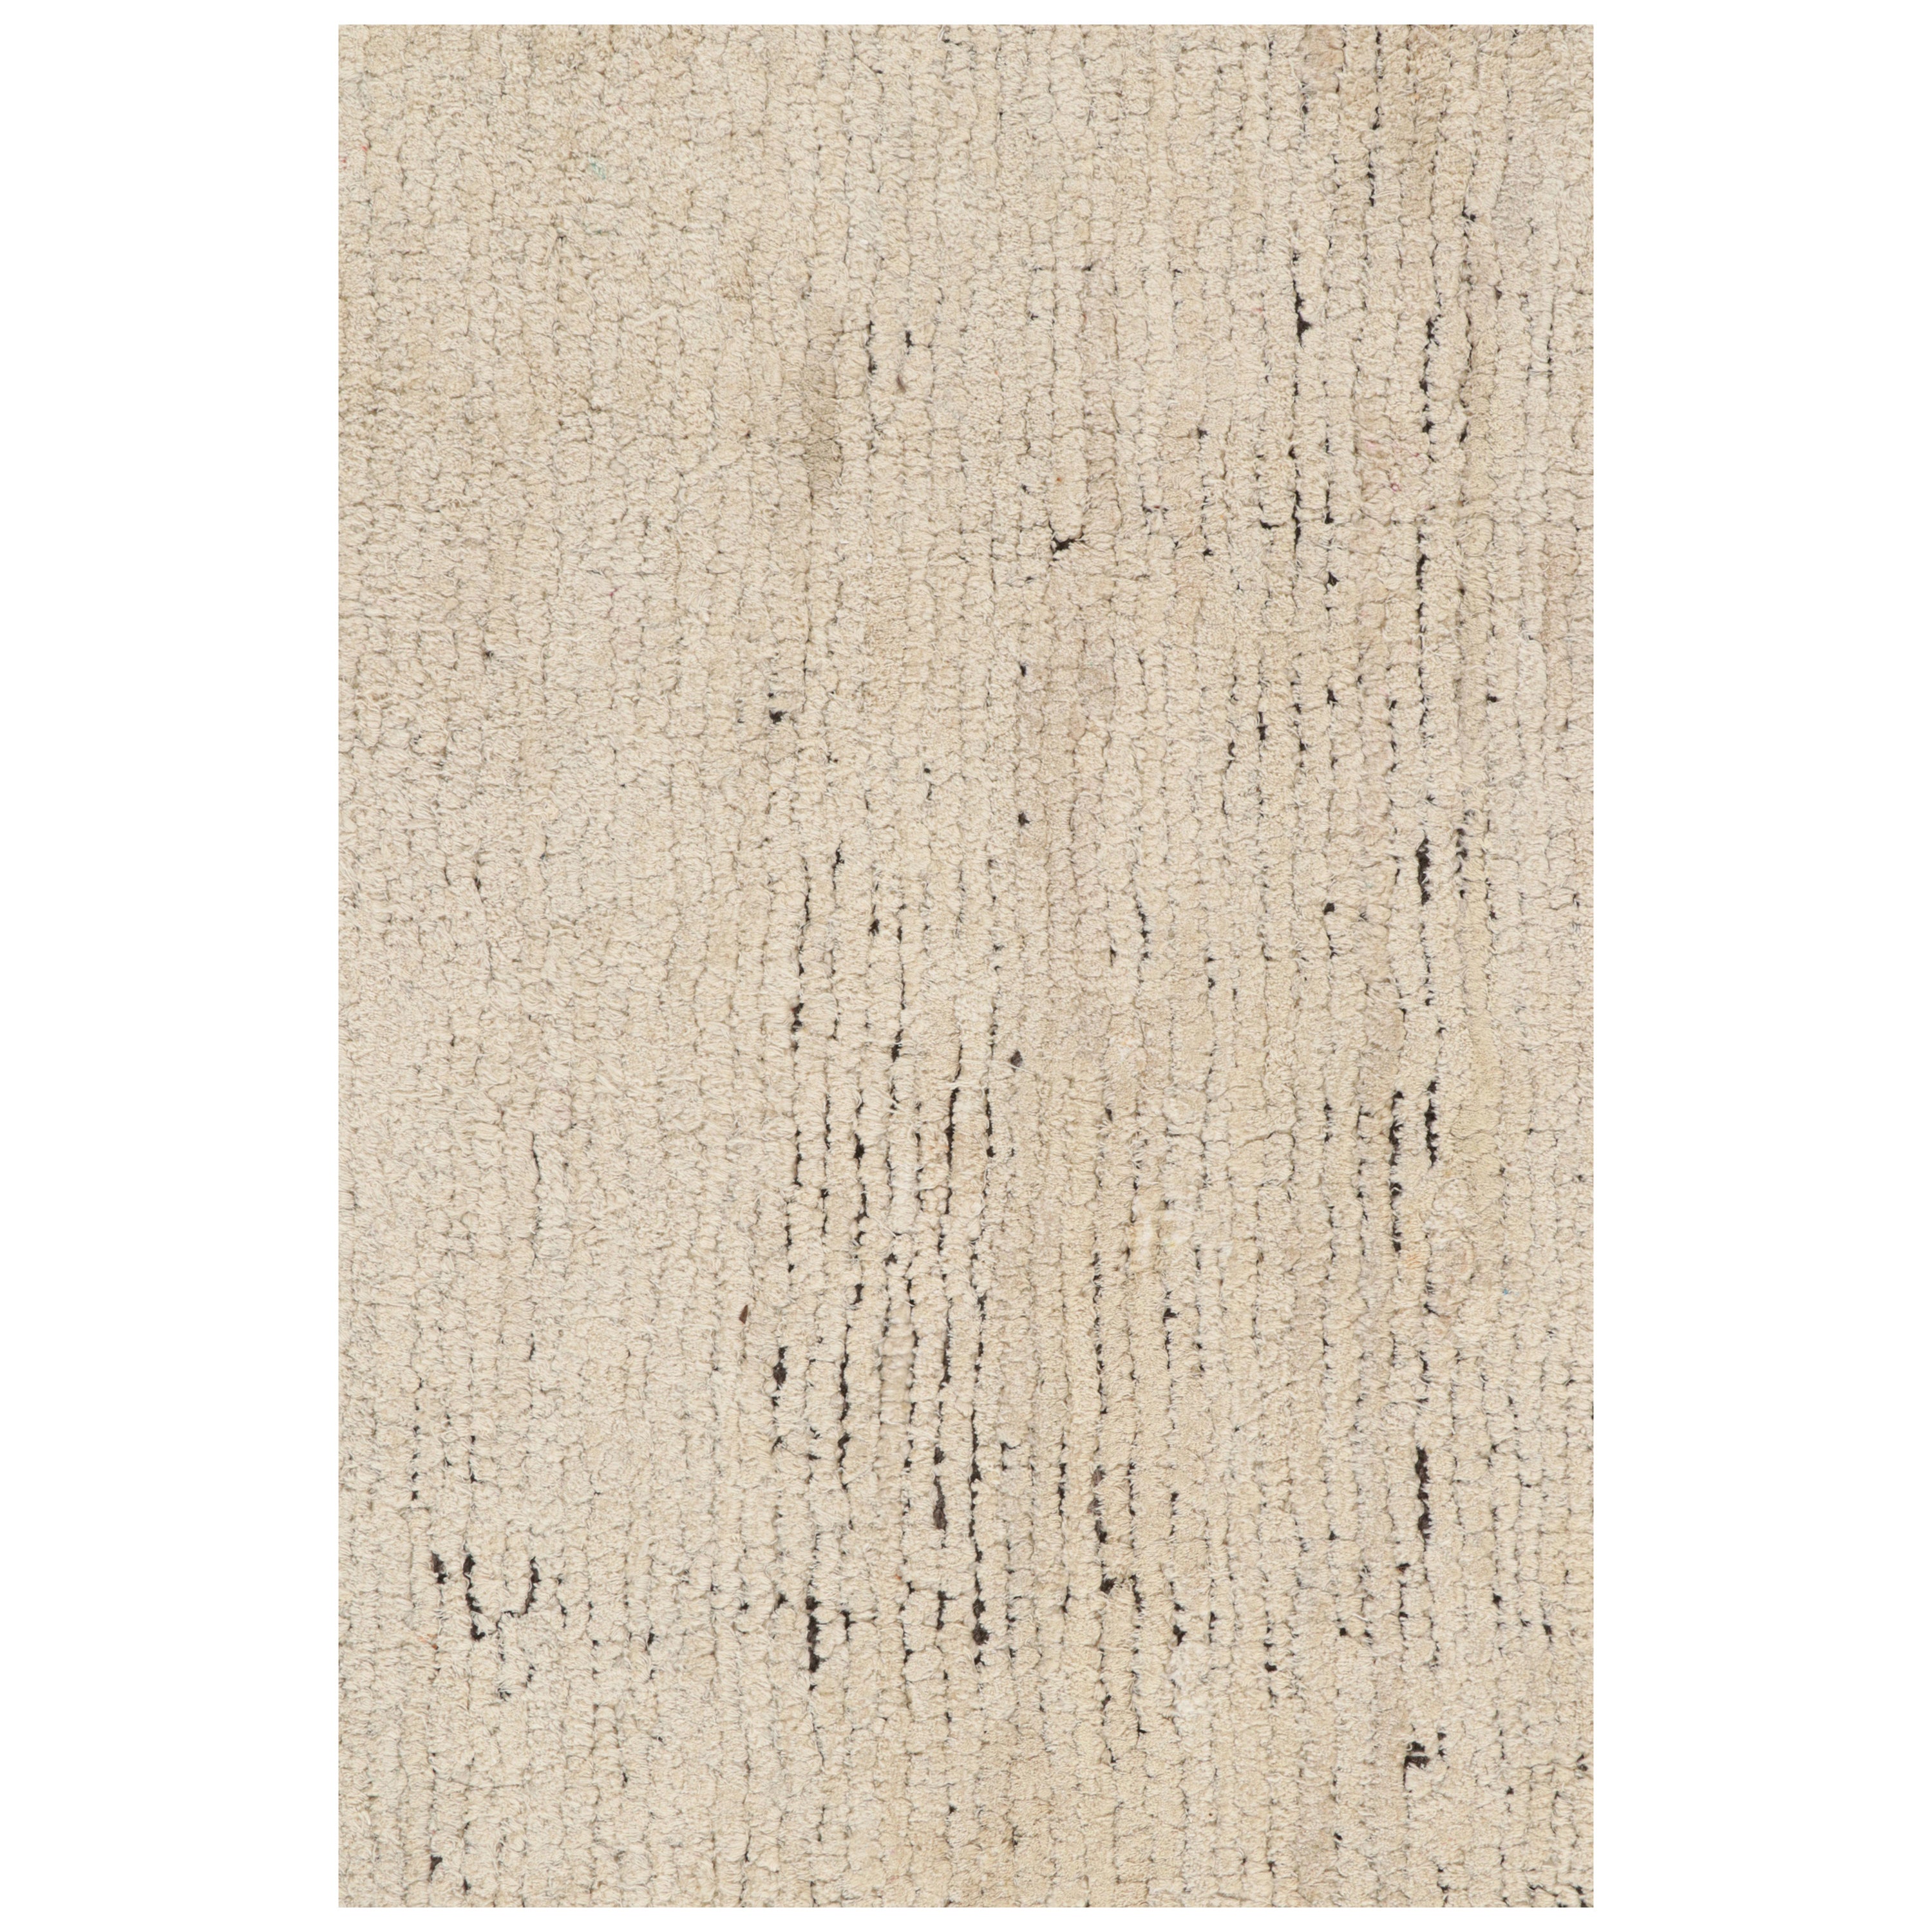 Rug & Kilim’s Contemporary Textural Runner in Beige and Off-White Tones